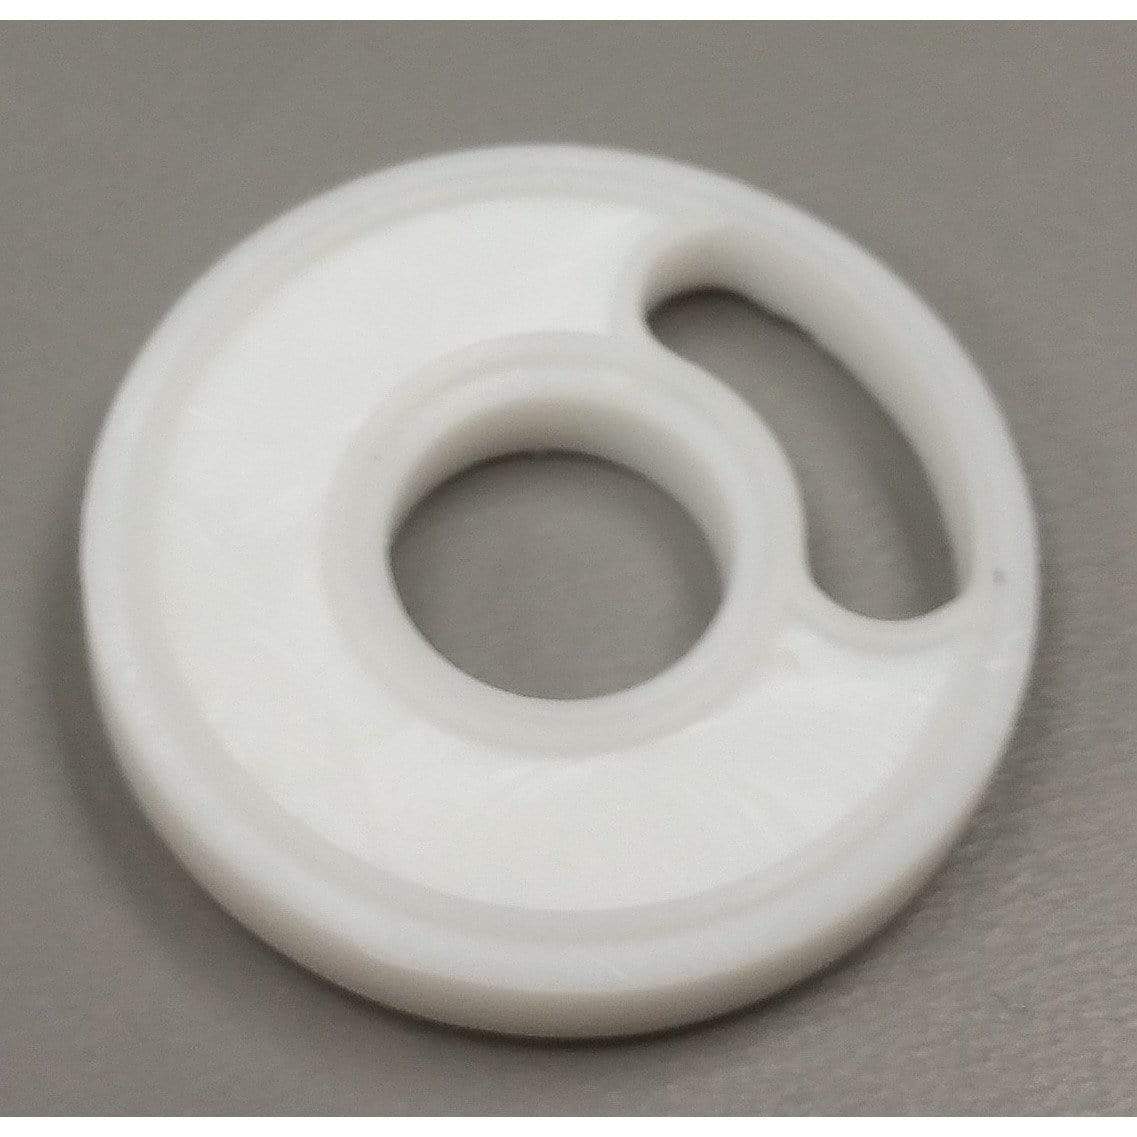 TFV4 Micro Replacement Seals TOP White Disc Seal Seals/Oring's